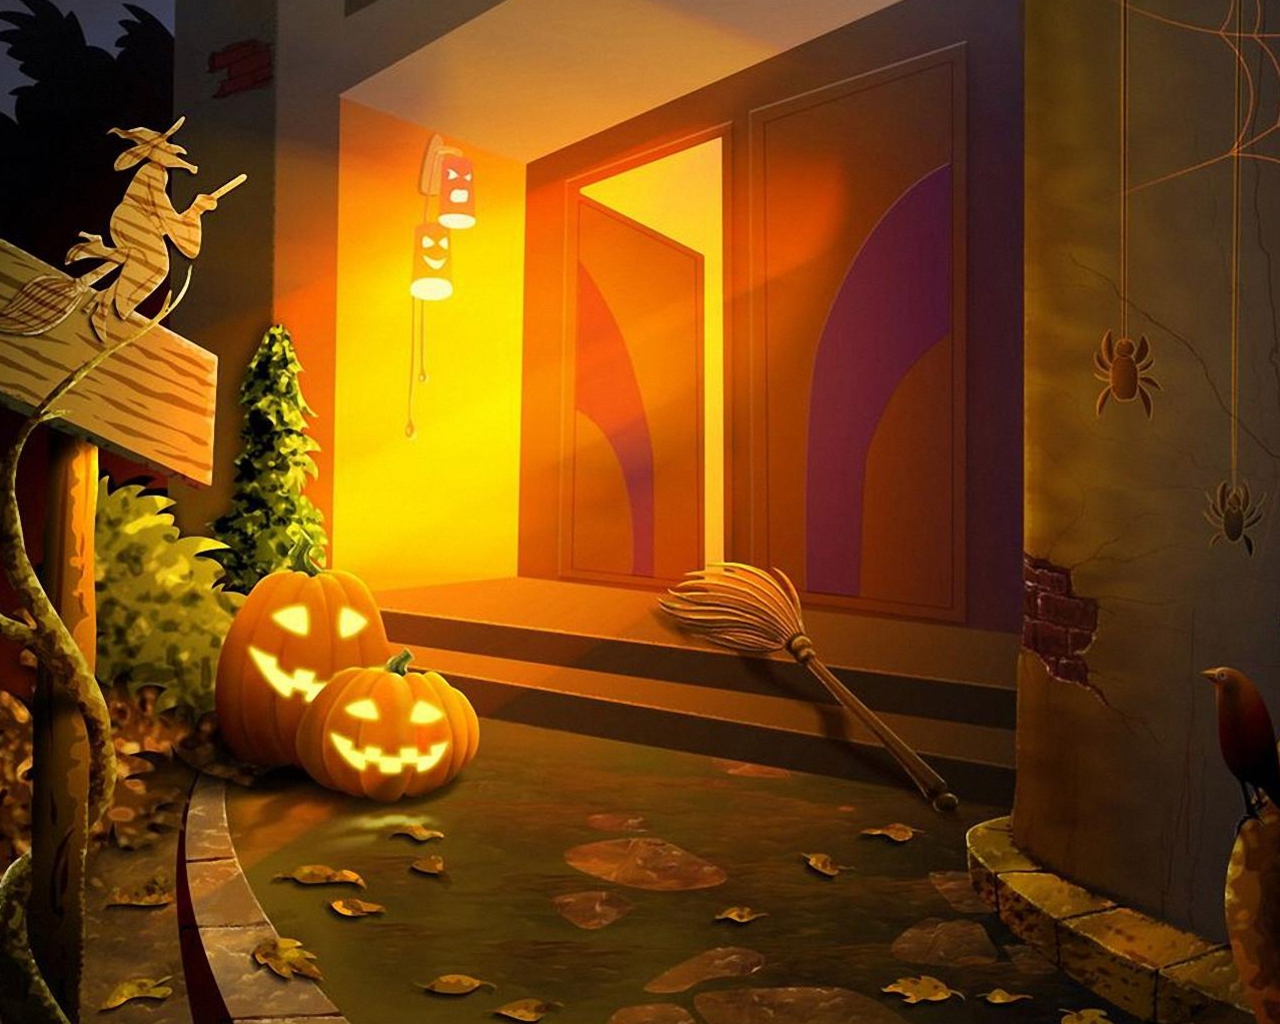 Death or Treat for windows download